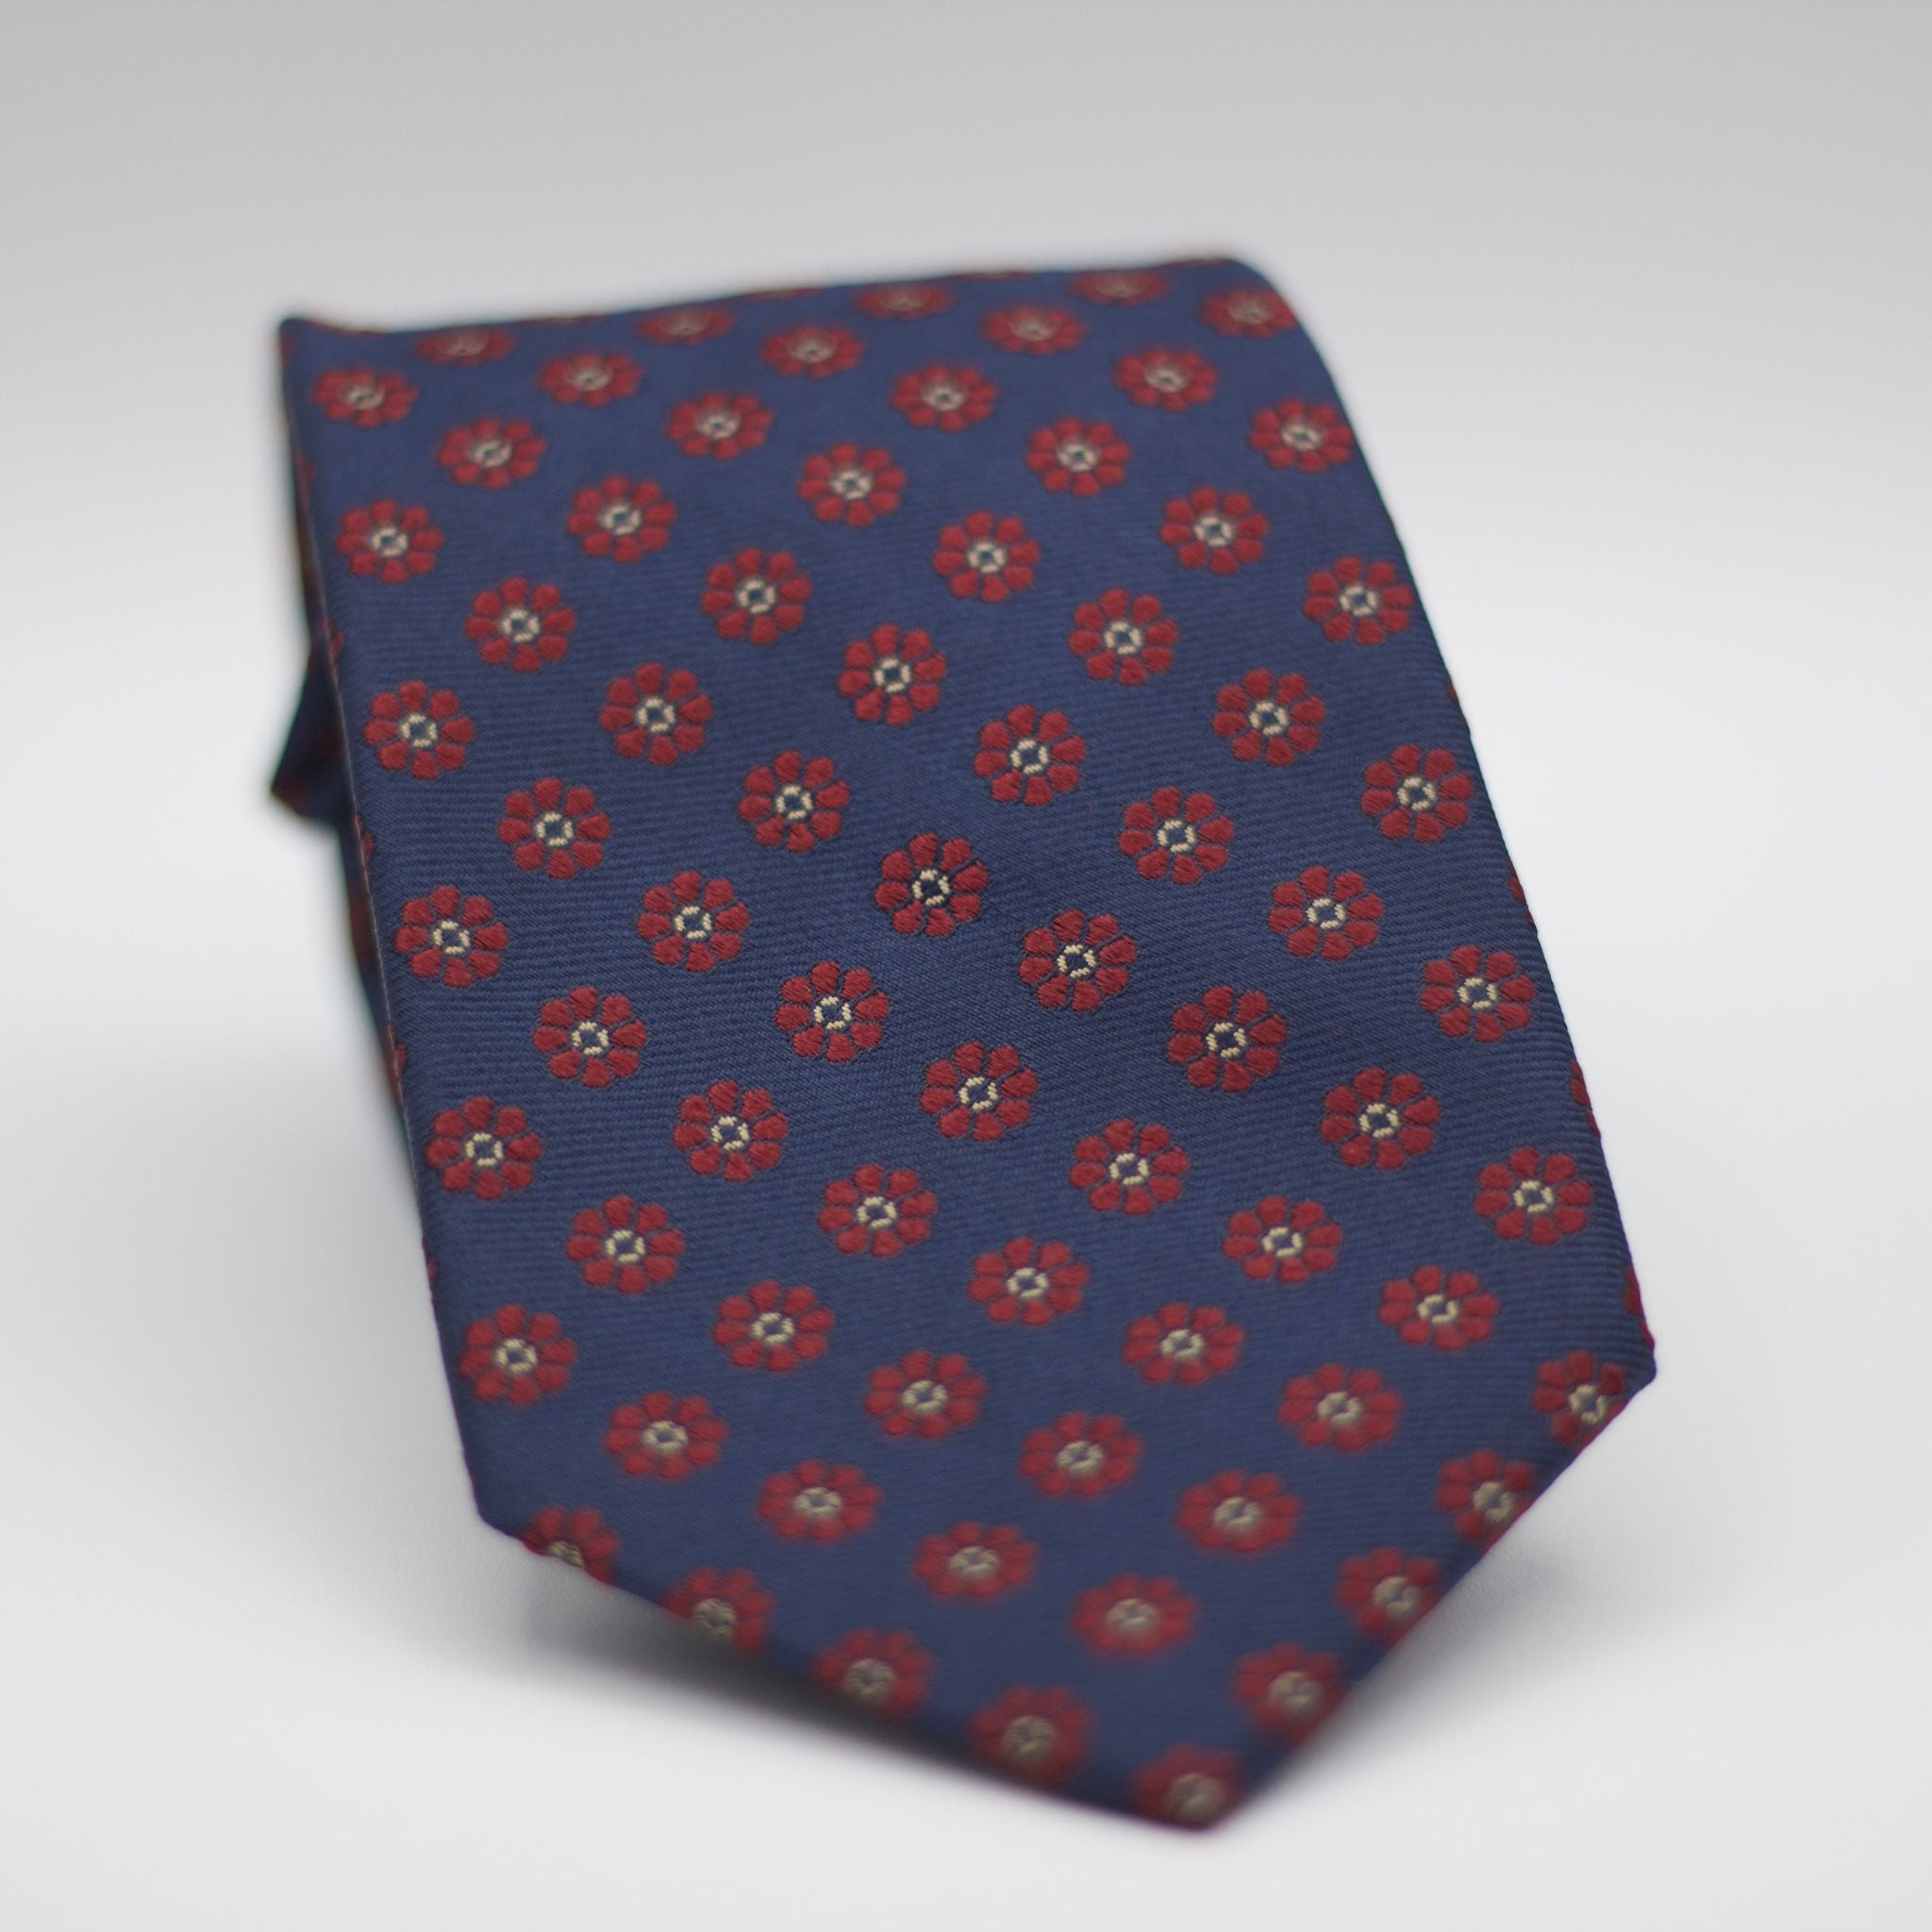 Holliday & Brown for Cruciani & Bella 100% Woven Jacquard Silk Tipped Blue with Red Floral motif tie Handmade in Italy 8 cm x 150 cm #5817